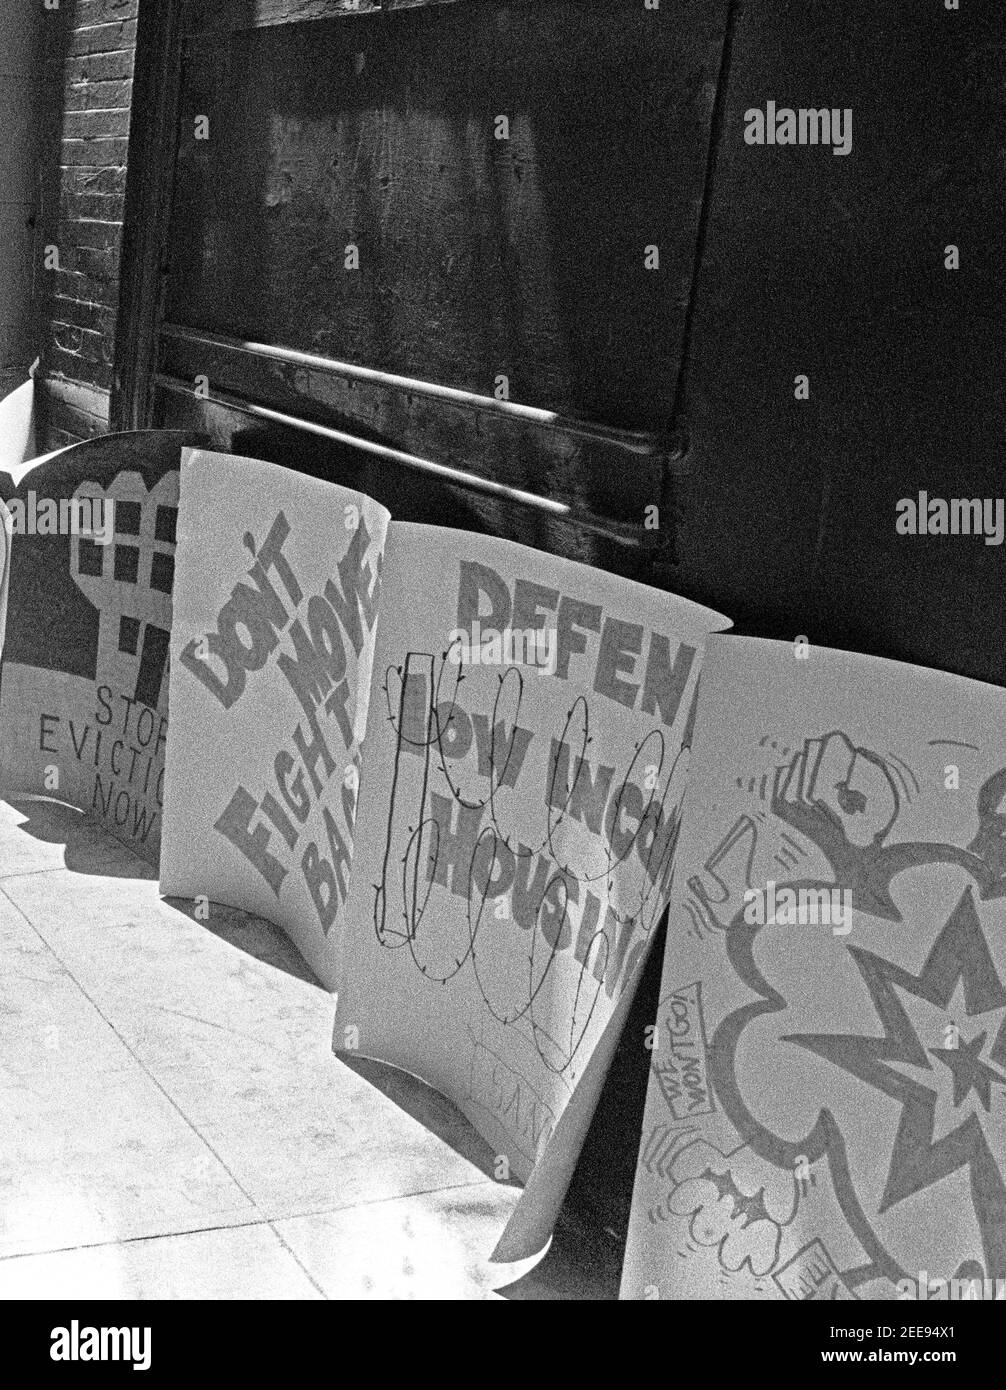 posters advocating for low income housing, on a San Francisco, California sidewalk in the 1980s Stock Photo